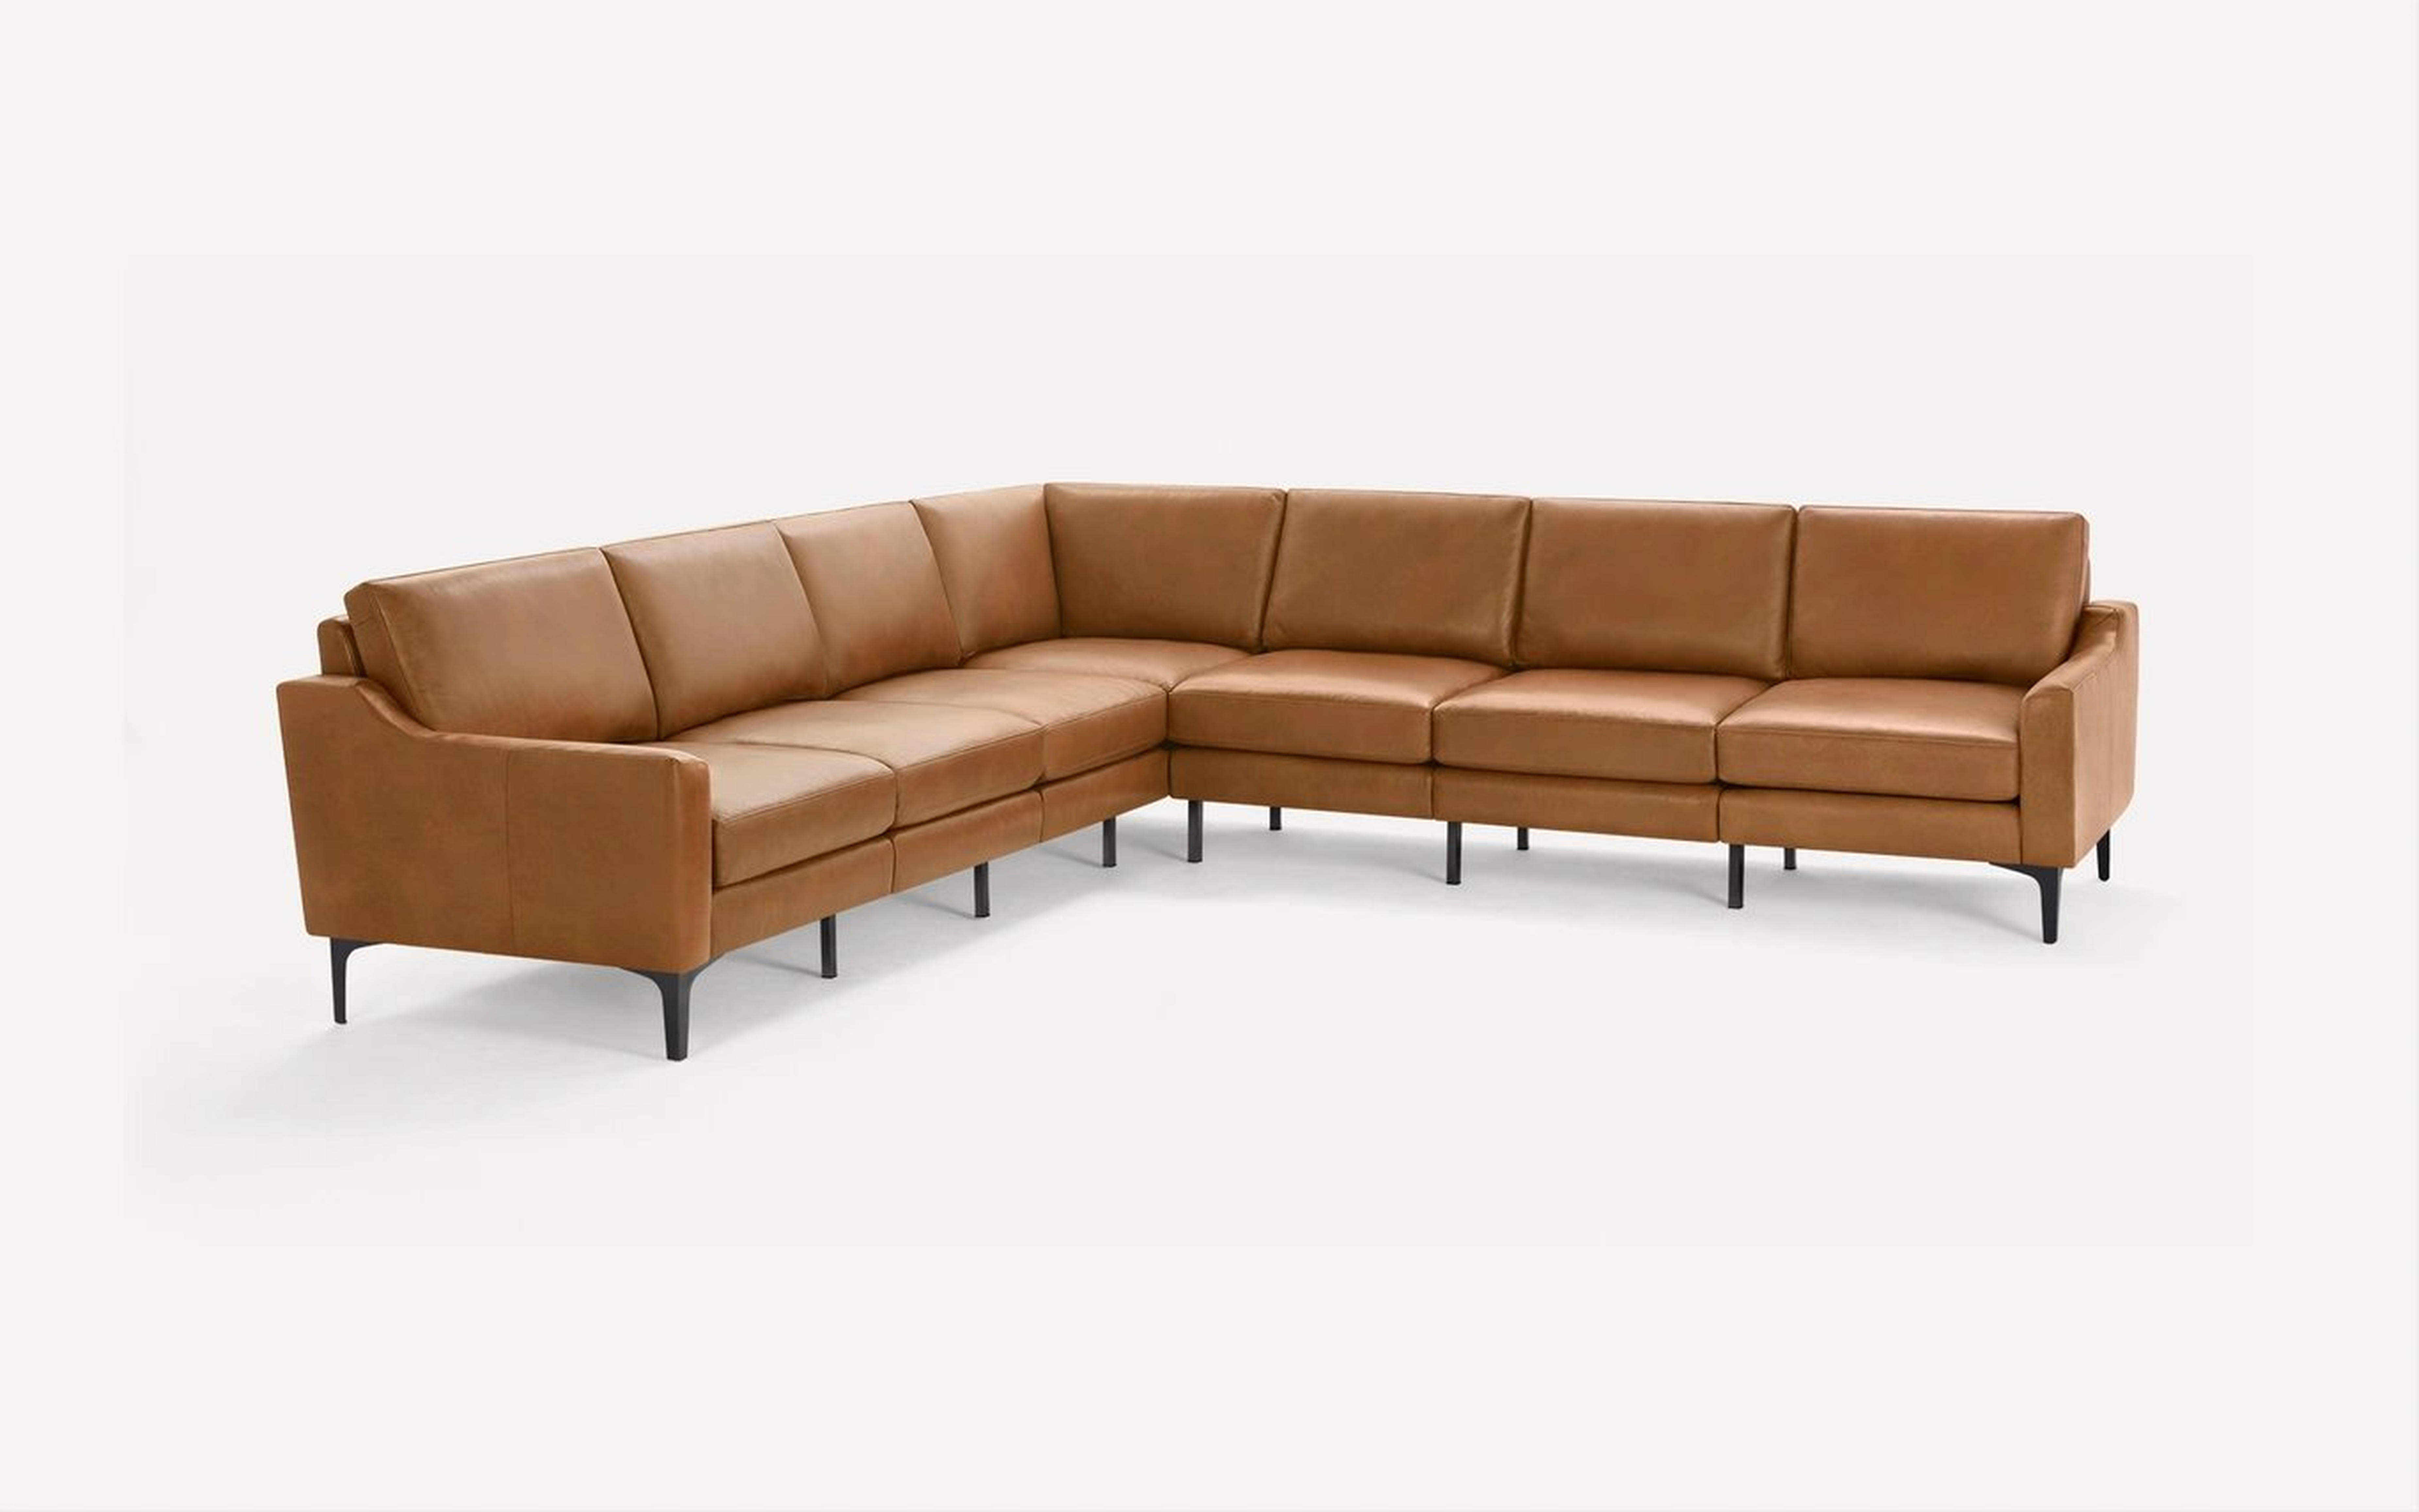 The Slope Nomad Leather 7-Seat Corner Sectional in Camel, Slope Arm, Metal Leg - Burrow